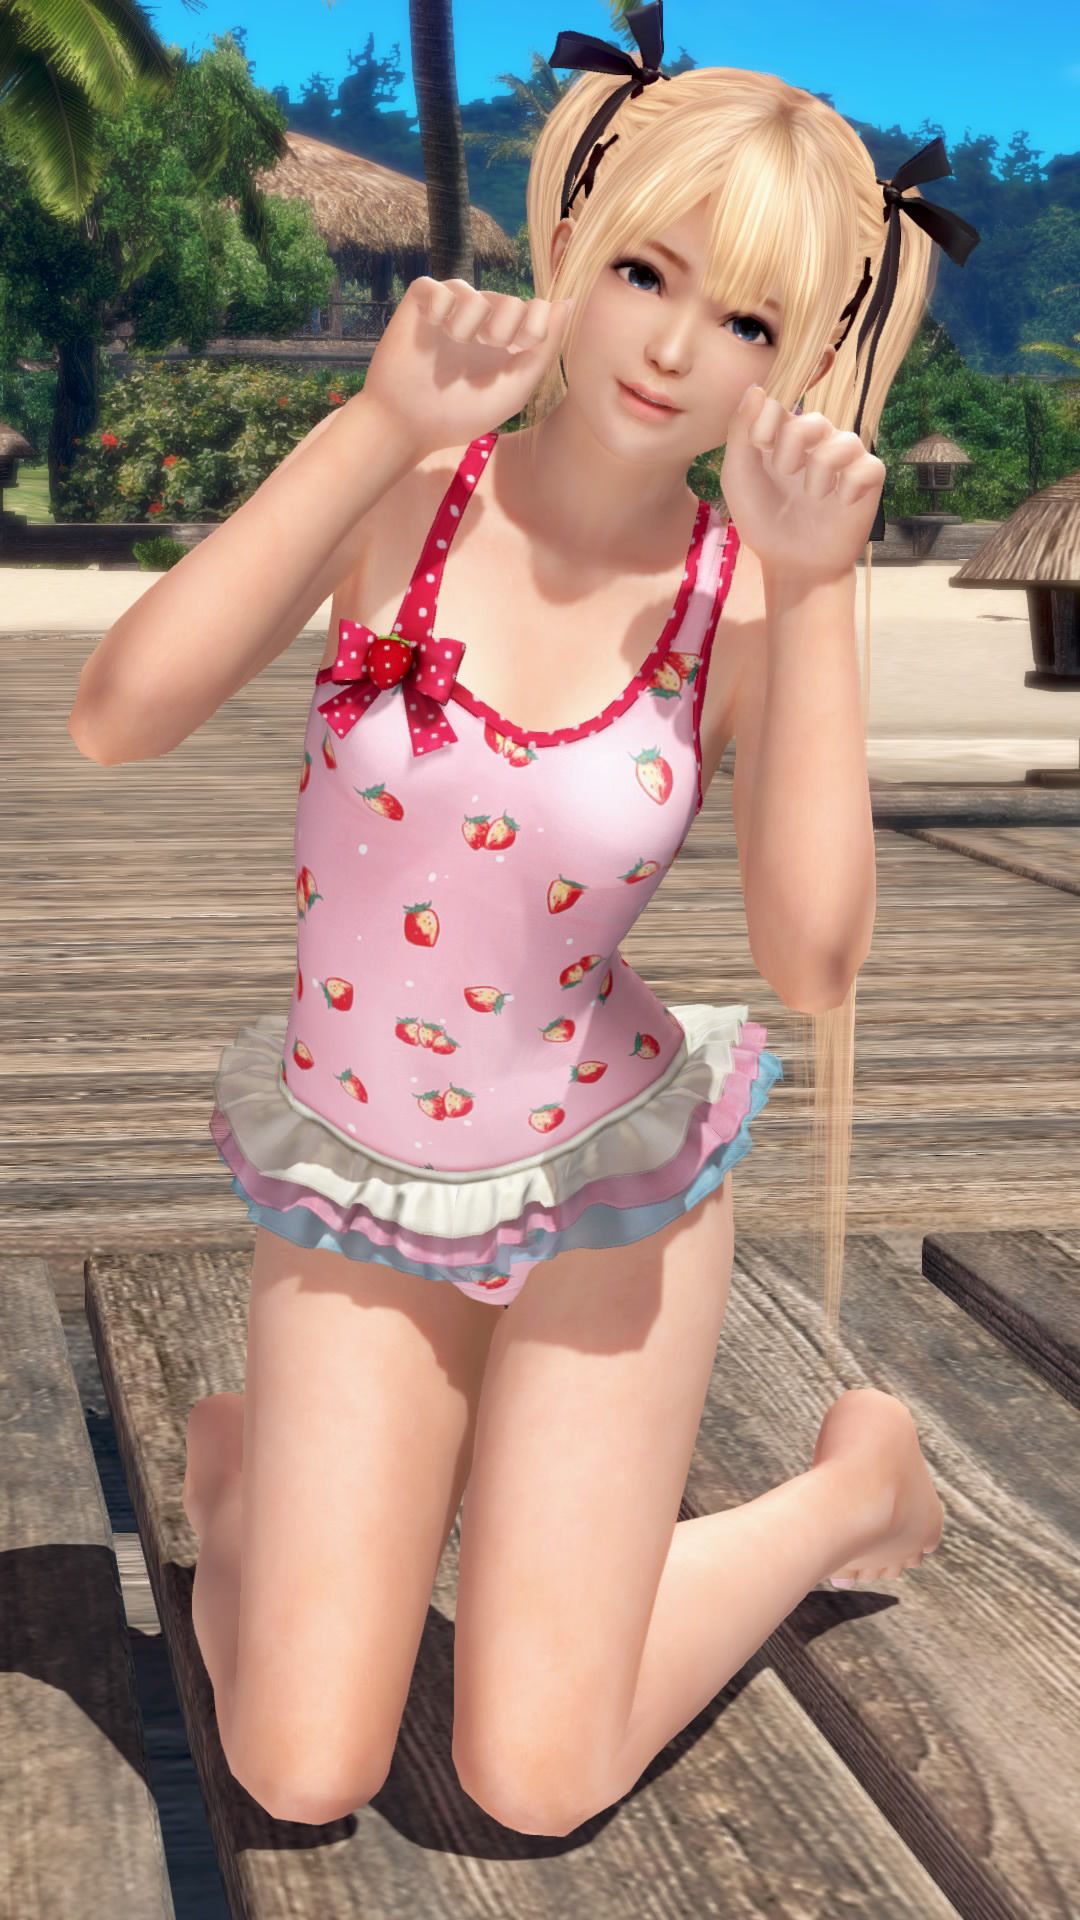 DOAX3 recommend private shooting Association (Division of Rose-Marie) in swimsuit 3